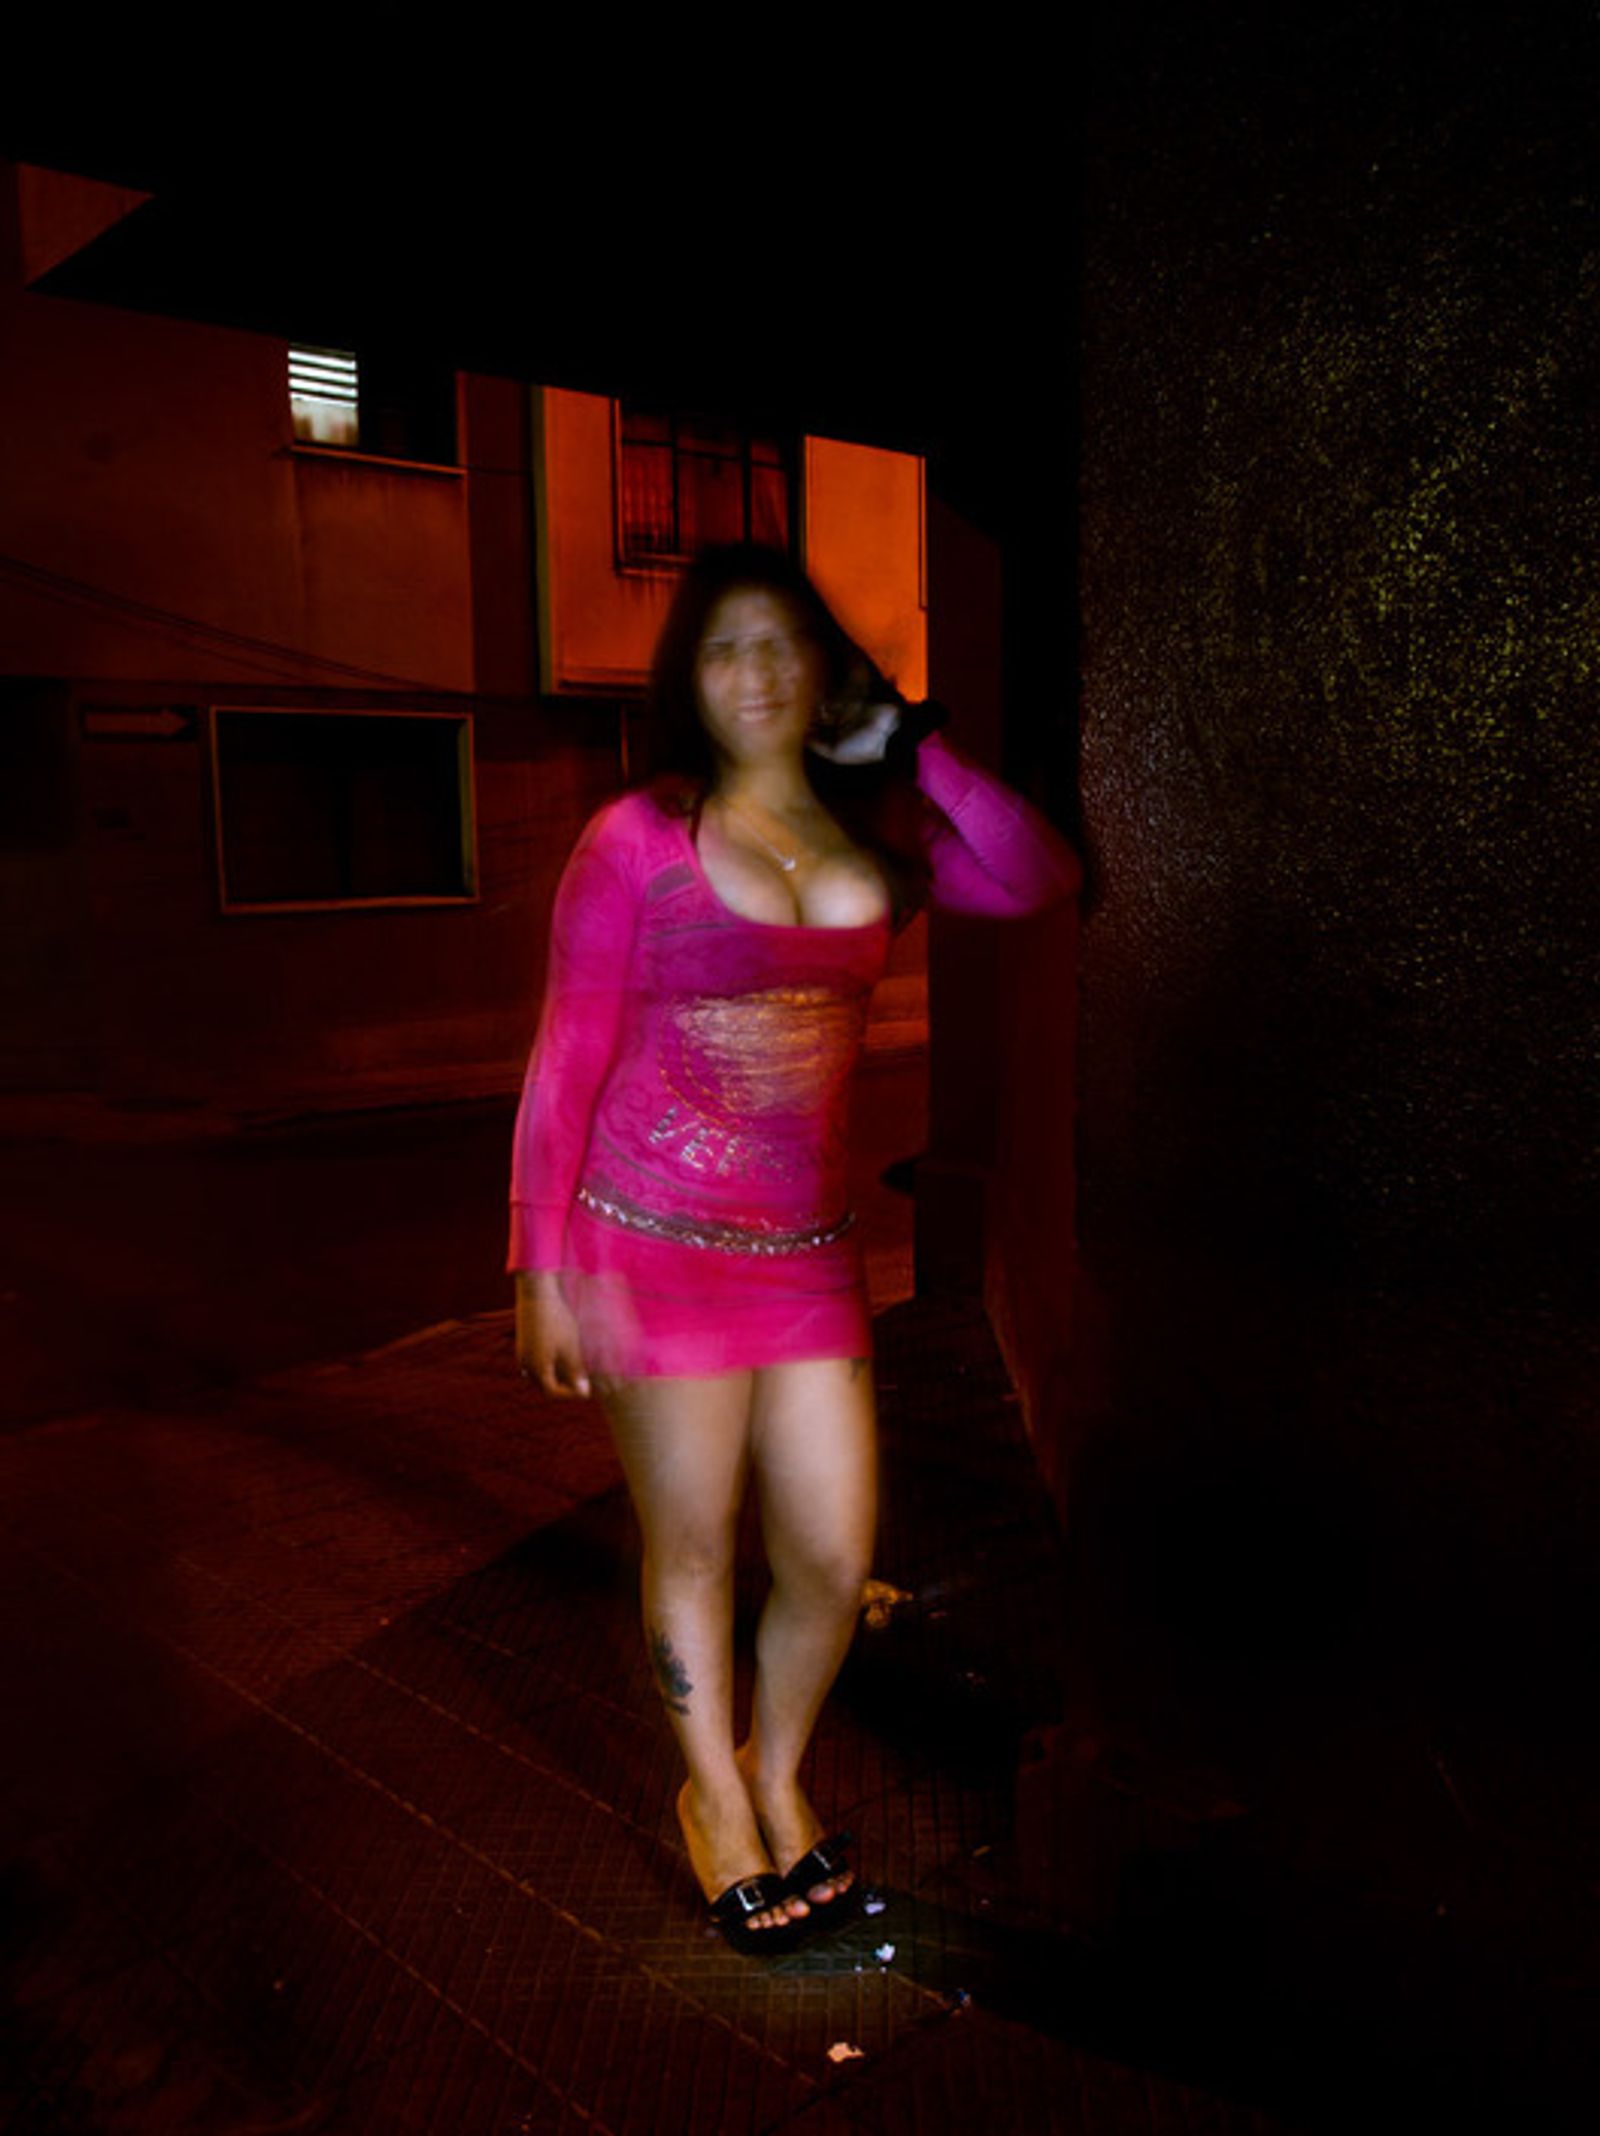 © Henrietta Soininen - Image from the Prostitutes photography project